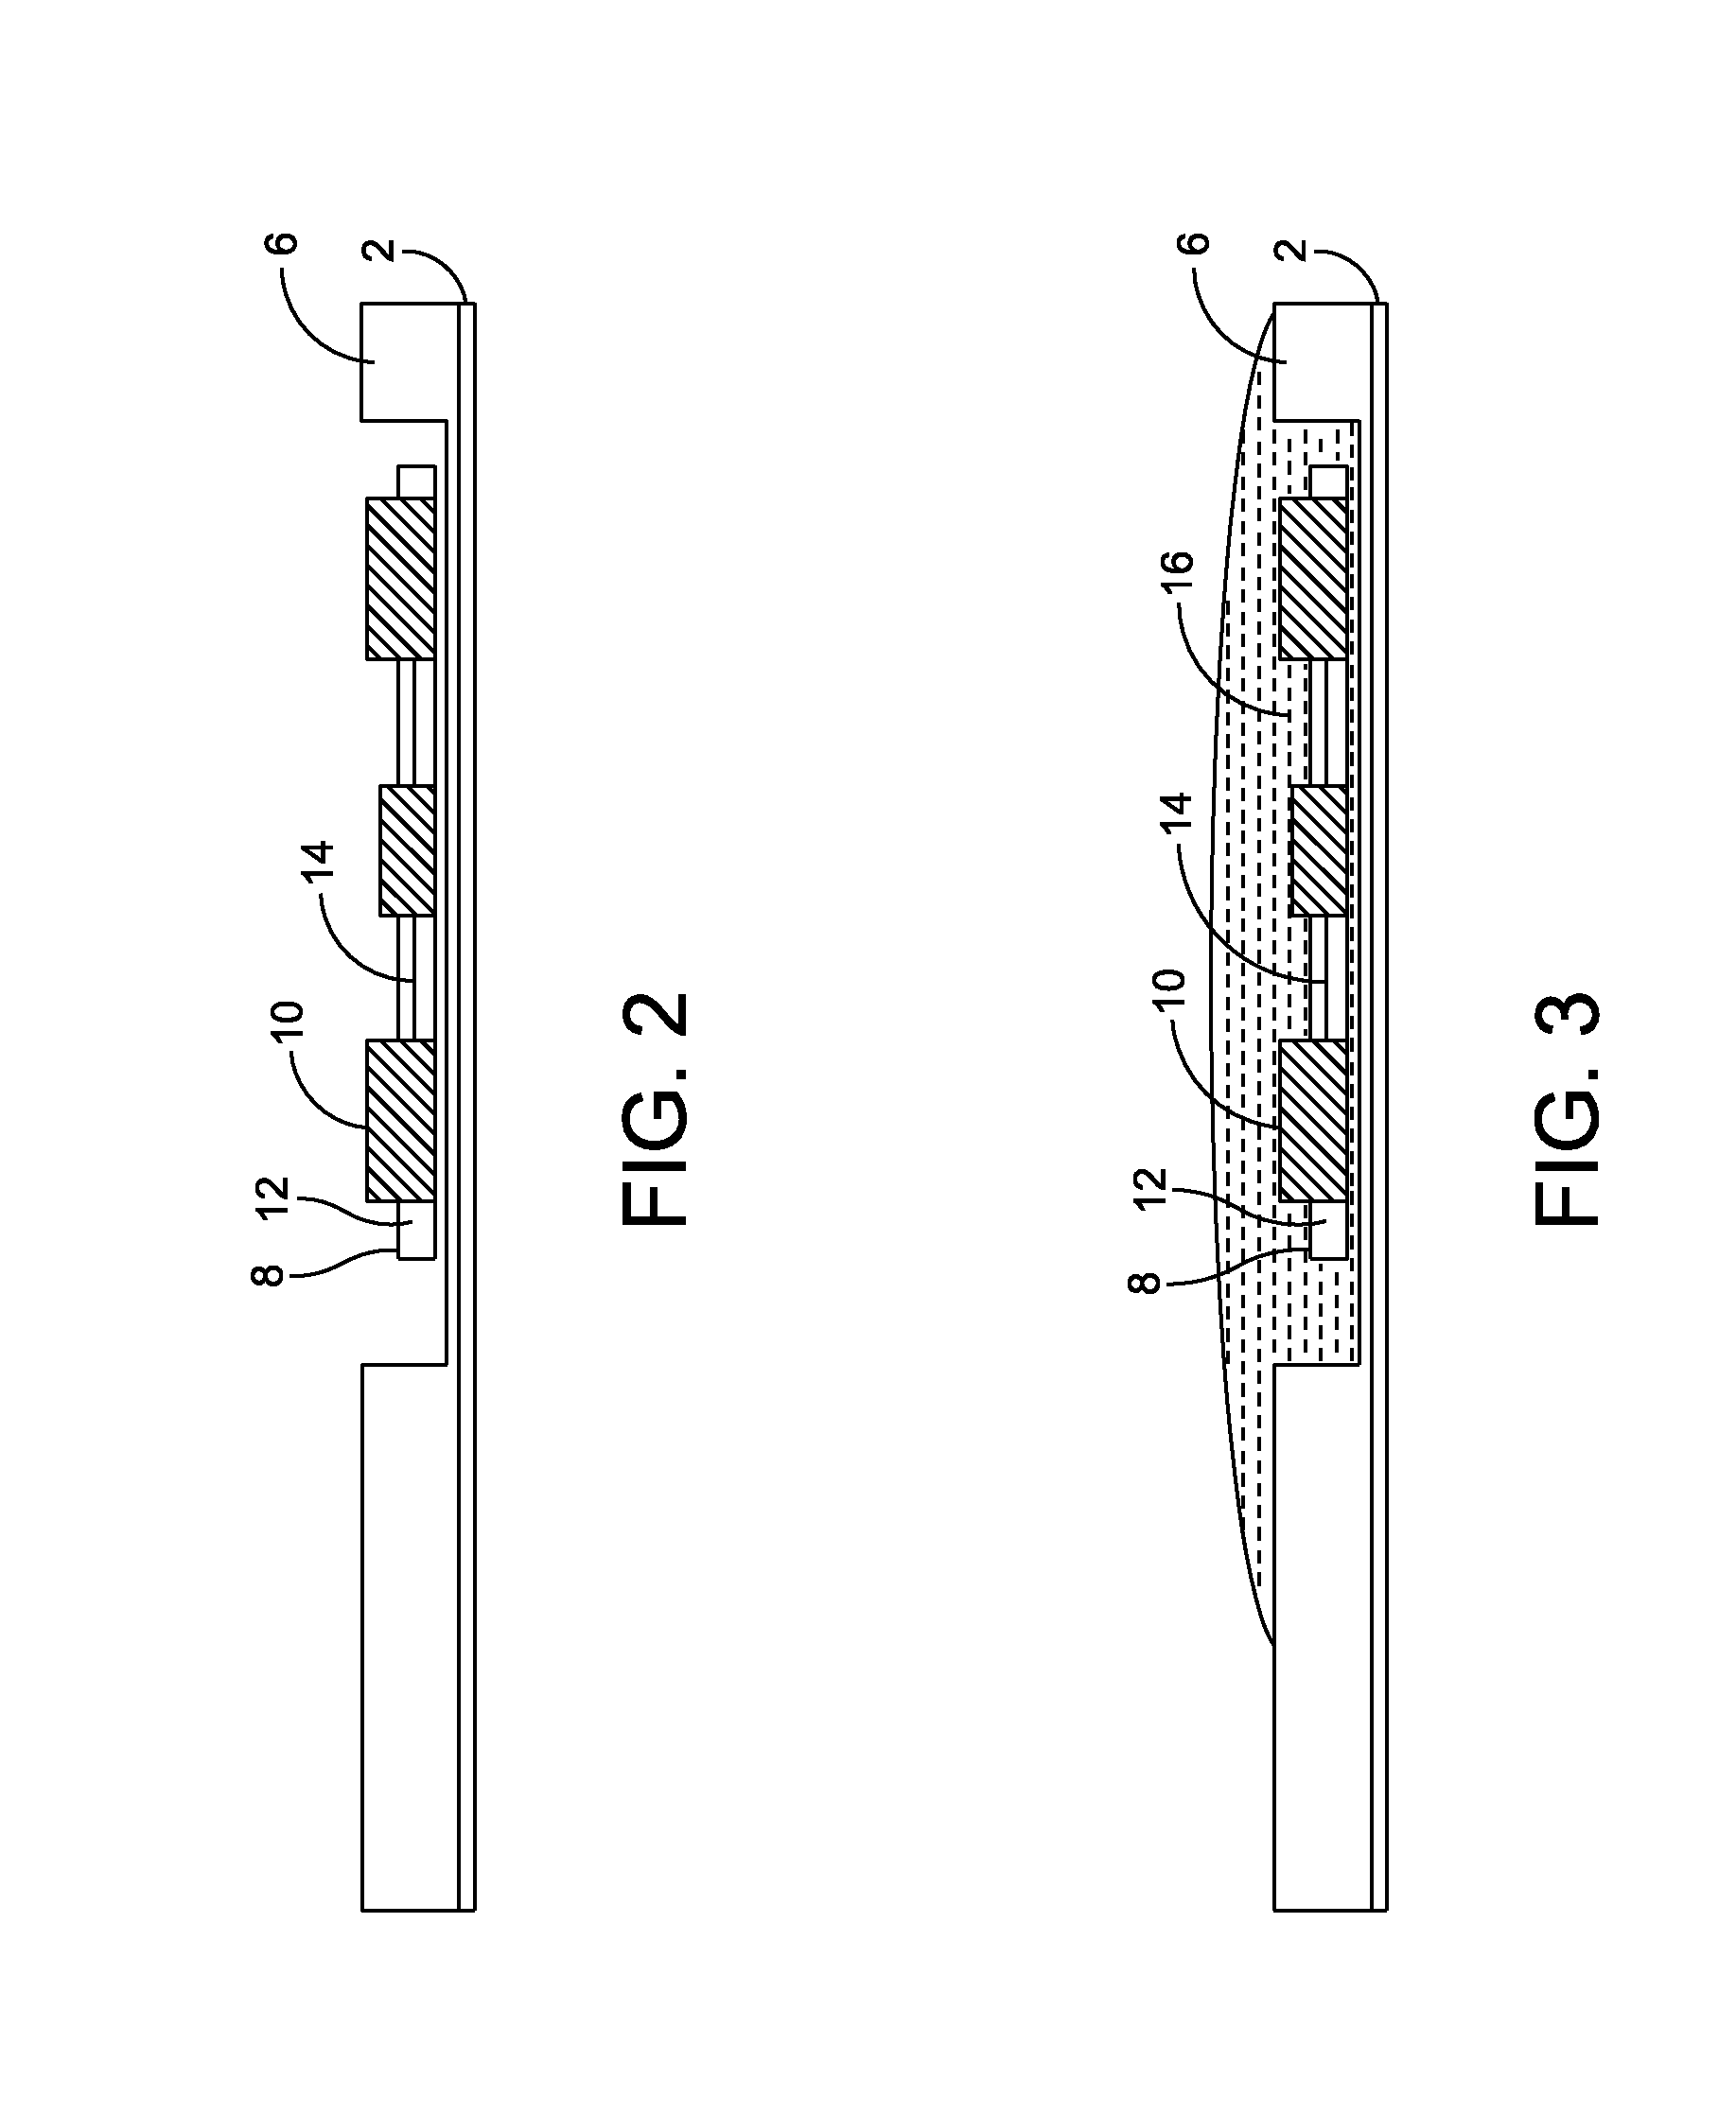 Apparatus and method for making information carrying cards through radiation curing, and resulting products